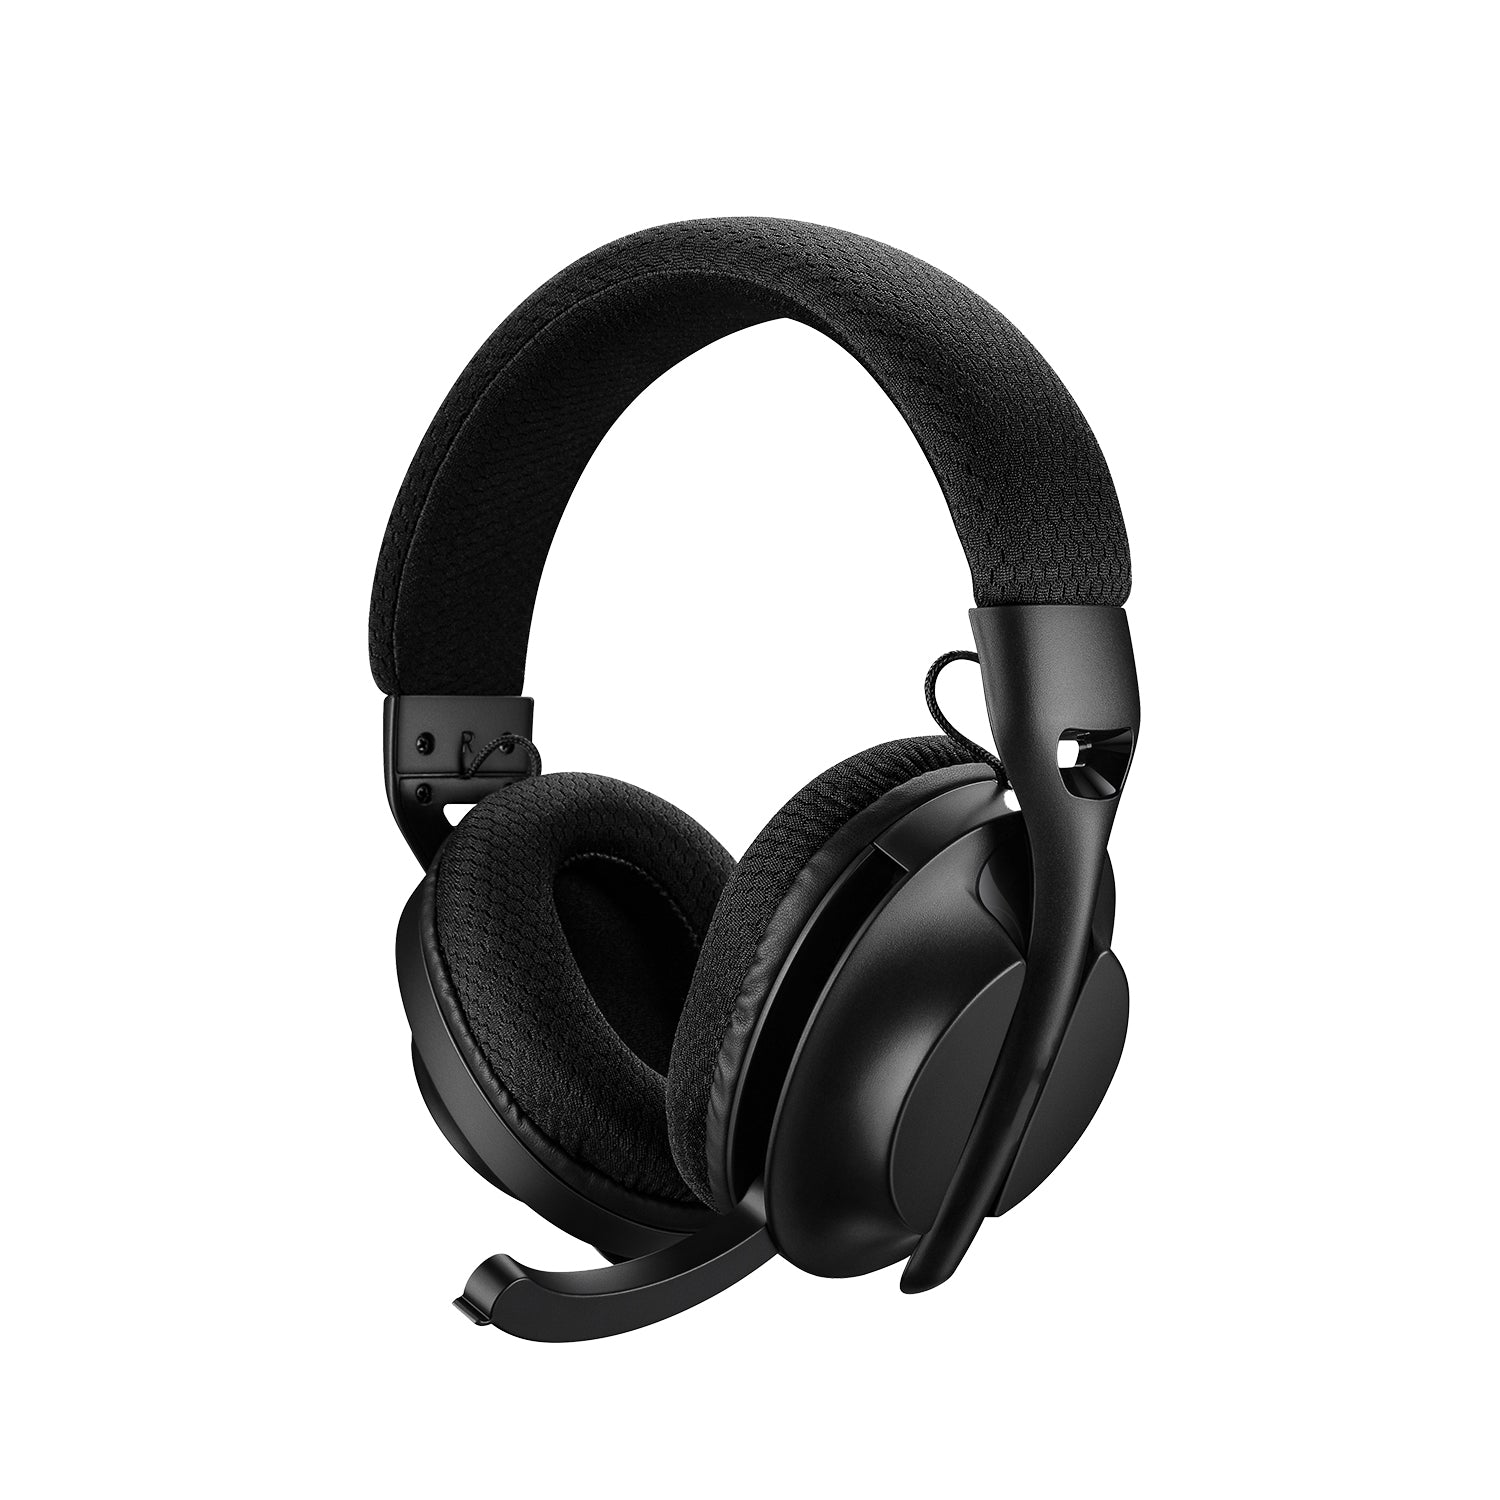 M360 Tri-Mode Gaming Headset In Black with Microphone Down Angled View